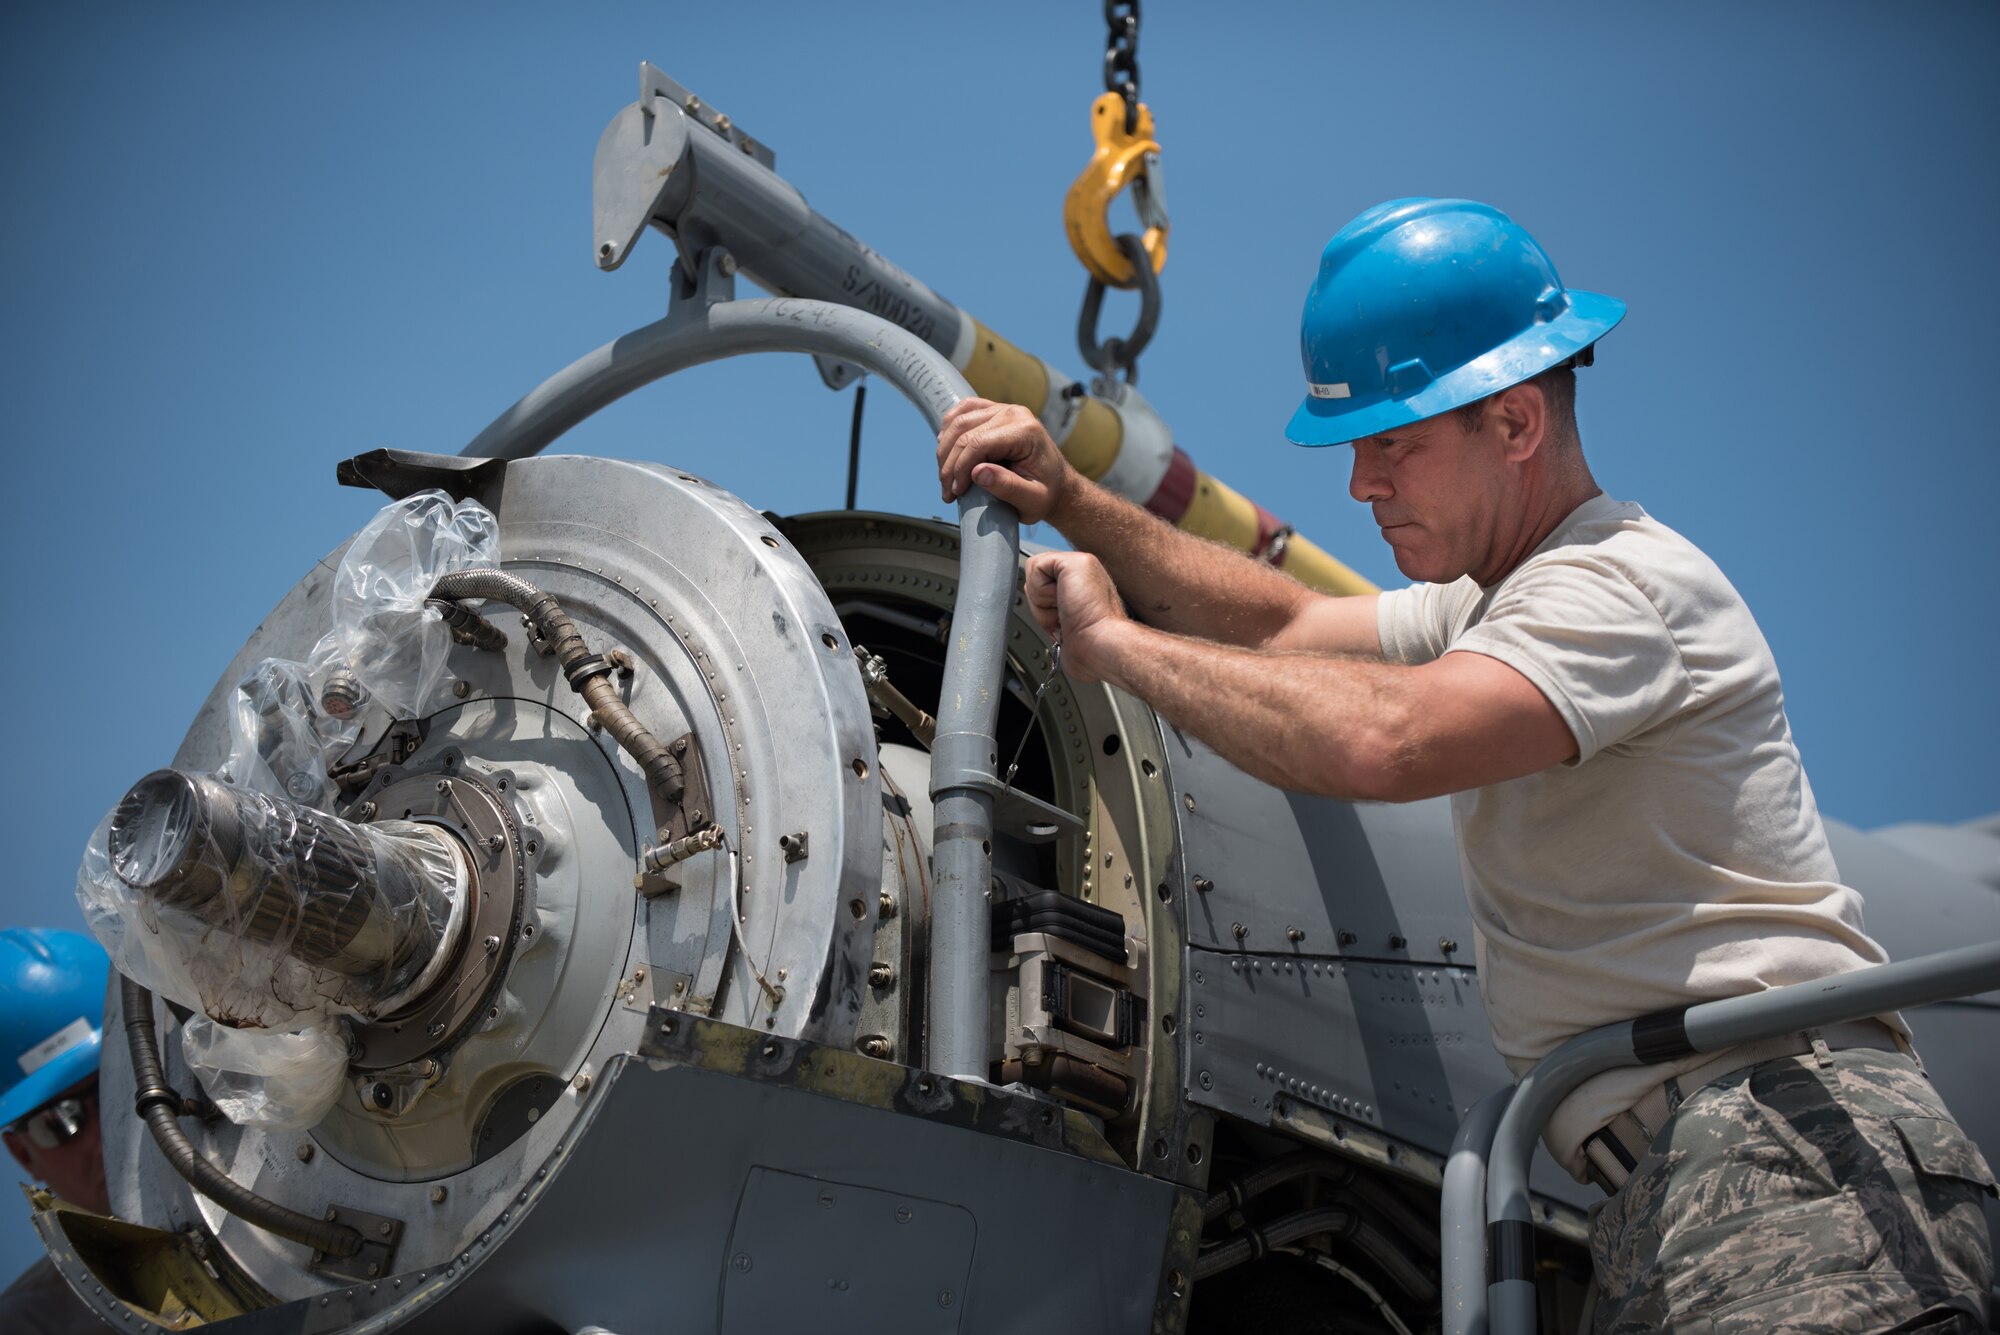 U.S. Air Force Tech. Sgt. Alan Broadus, a propulsion mechanic from the Kentucky Air National Guard’s 123rd Airlift Wing, removes an engine from a C-130 Hercules aircraft at the Air National Guard’s Air Dominance Center in Savannah, Ga., June 15, 2016. Broadus is attending Maintenance University here, a weeklong course designed to provide intensive instruction in aircraft maintenance. Now in its eighth year, Maintenance University is sponsored by the 123rd Airlift Wing. (U.S. Air National Guard photo by Lt. Col. Dale Greer)